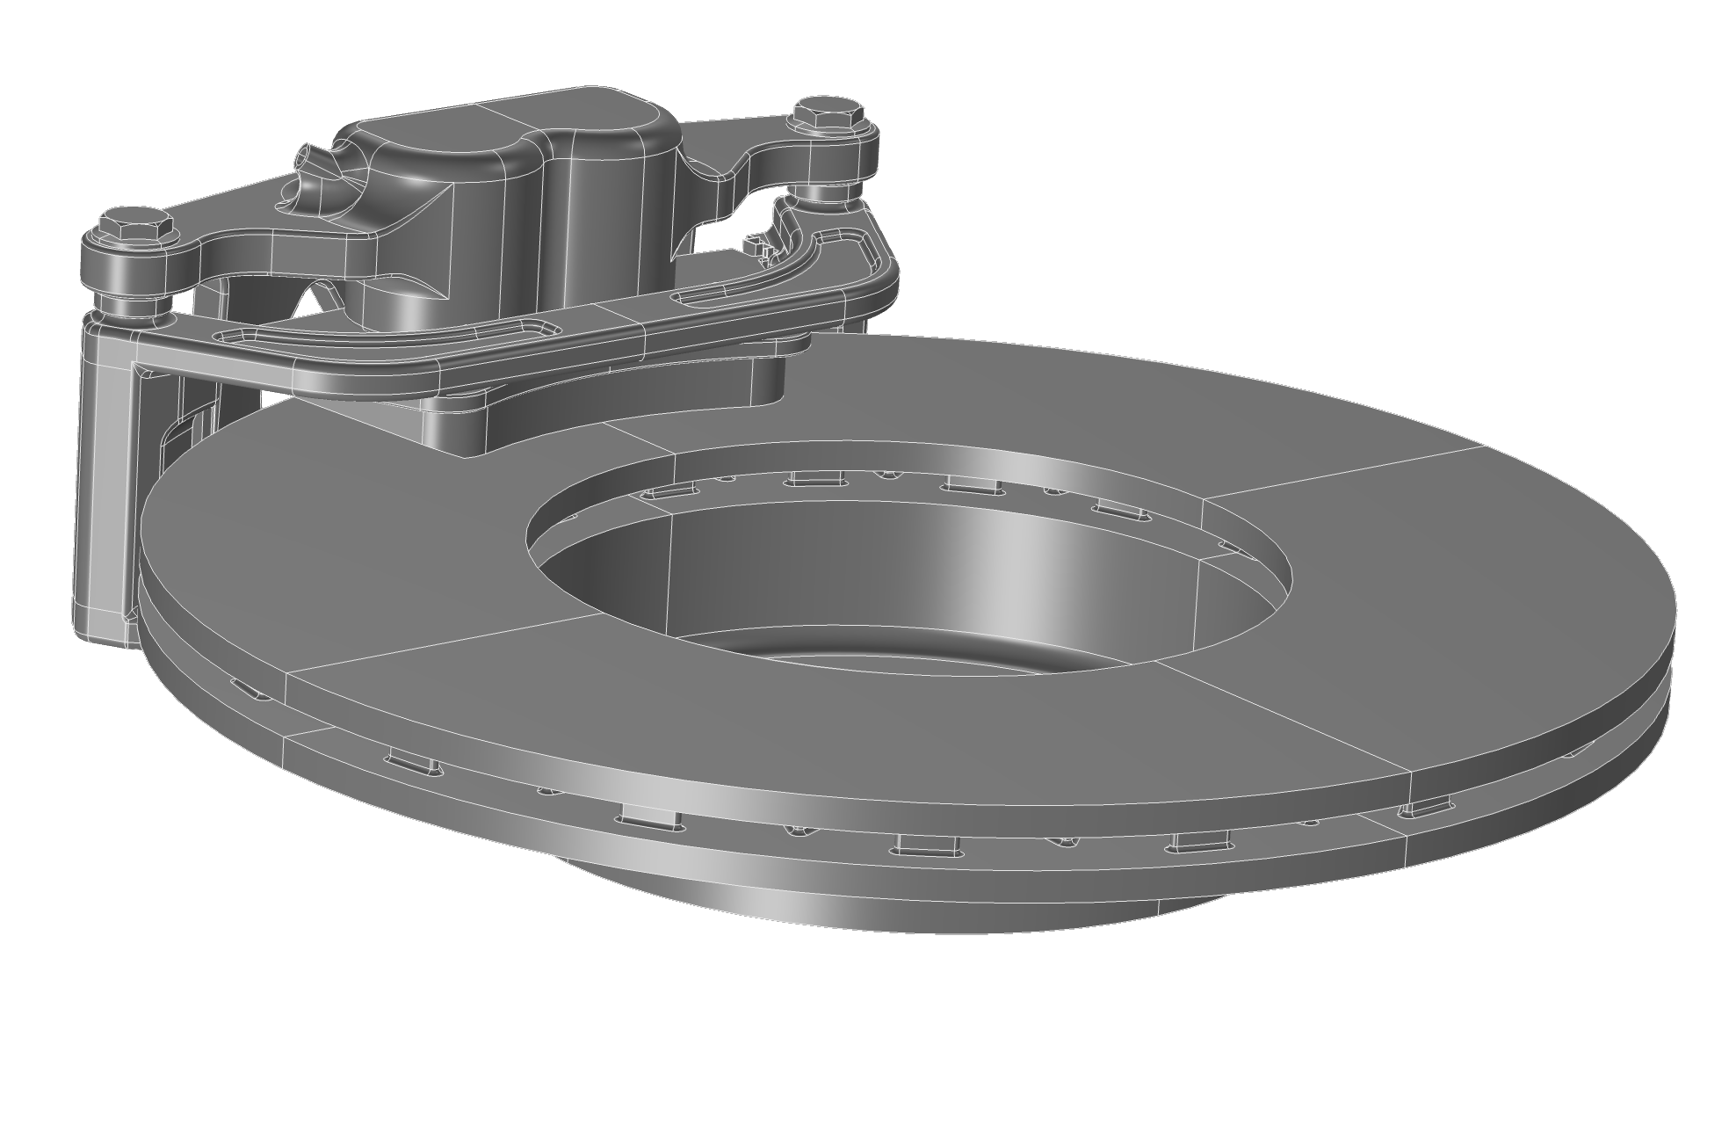 A gray geometry of a car disc brake assembly made up of a ventilated disc and caliper assembly.